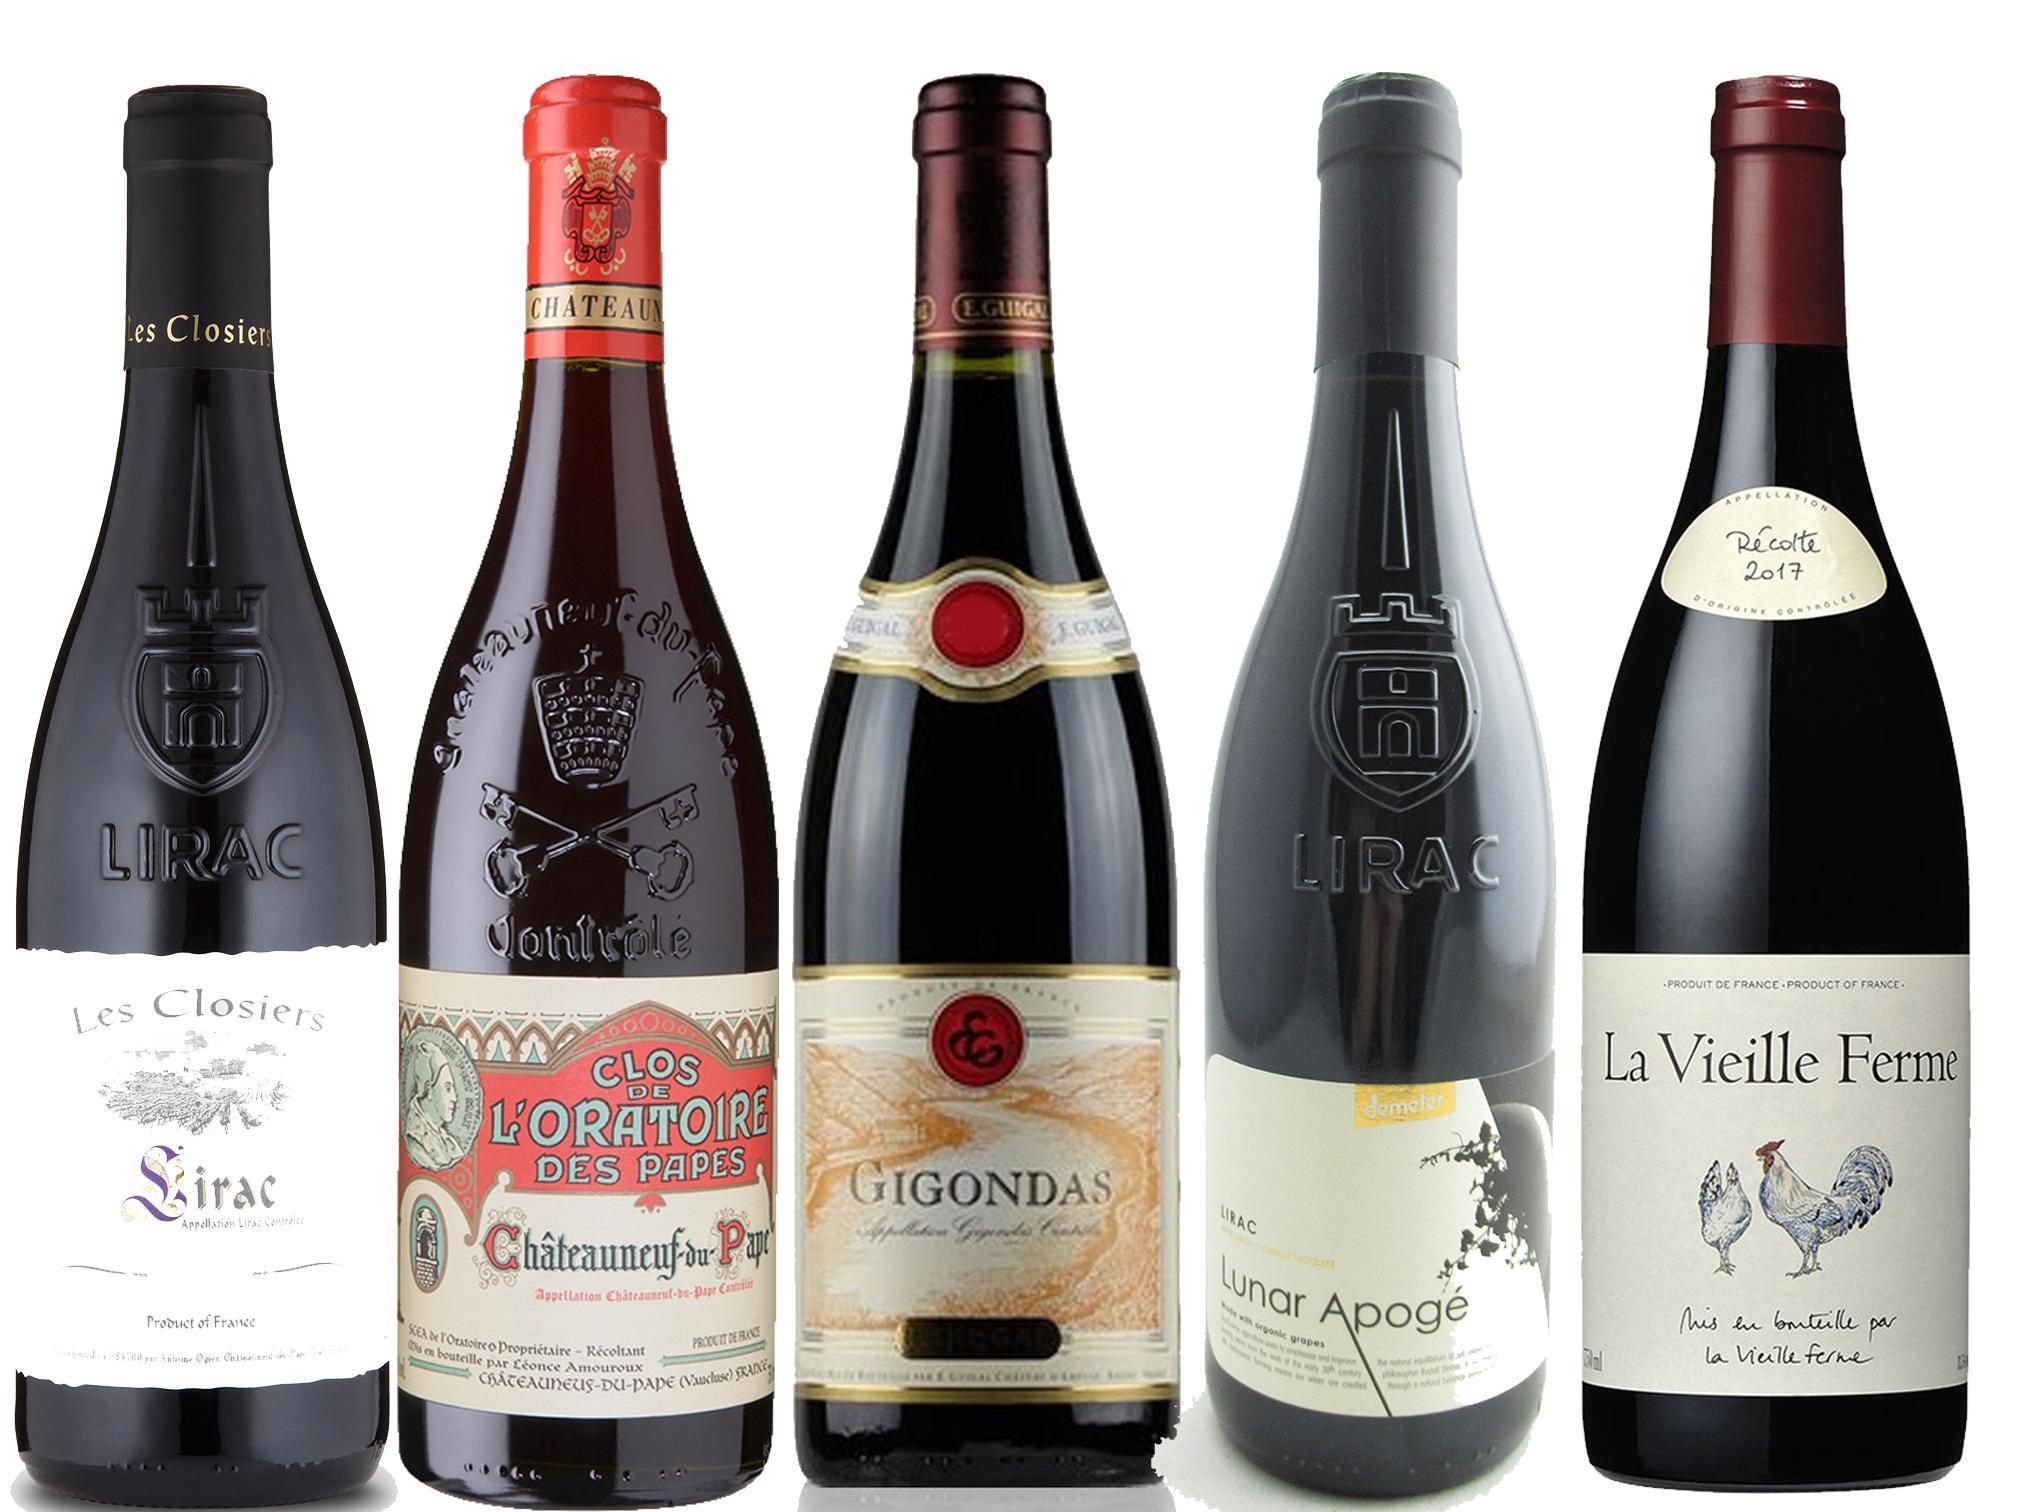 Grenache, syrah and mouvedre are the dominant grapes in these intense, powerful wines